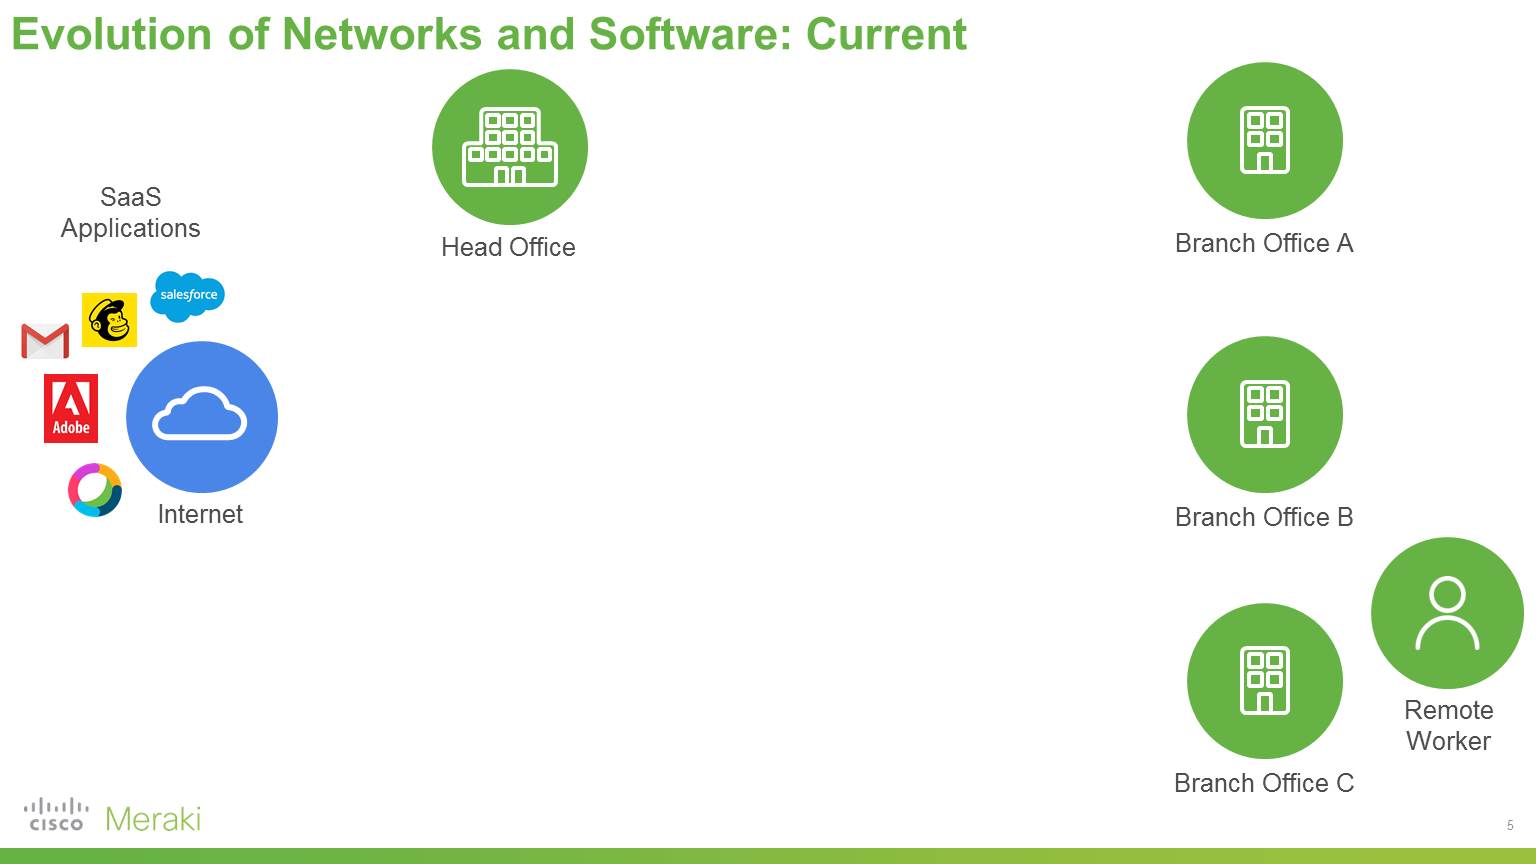 Current evolution of networks and software.